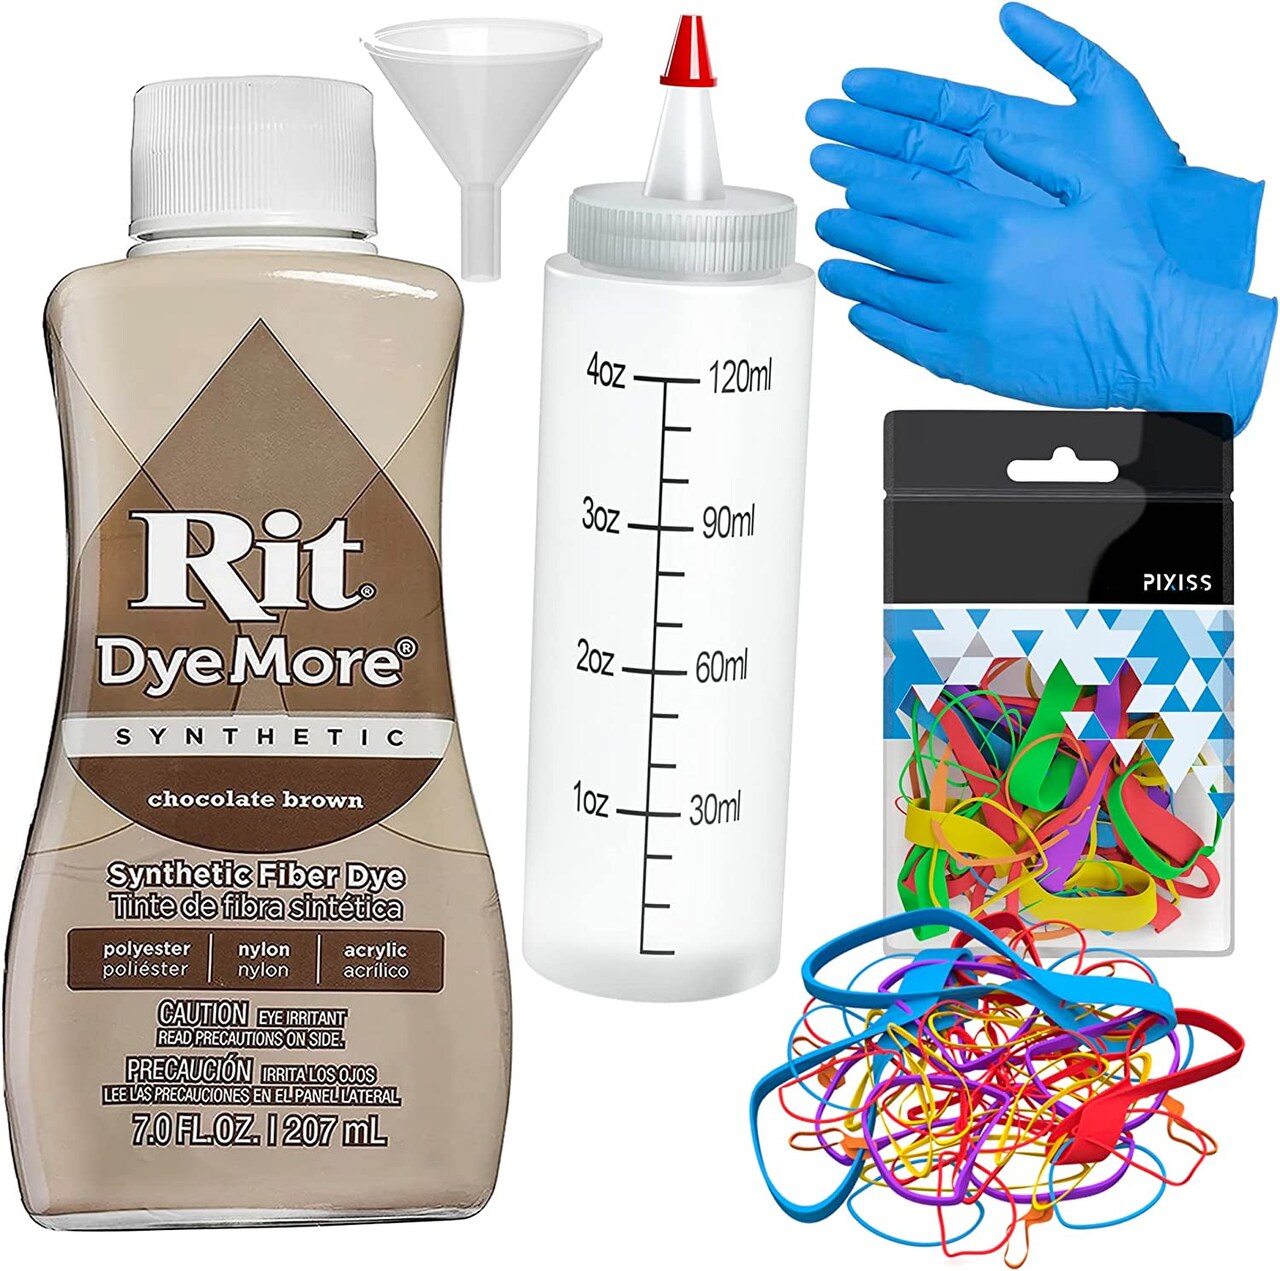 Synthetic Rit Dye More Liquid Fabric Dye Chocolate Brown, Pixiss